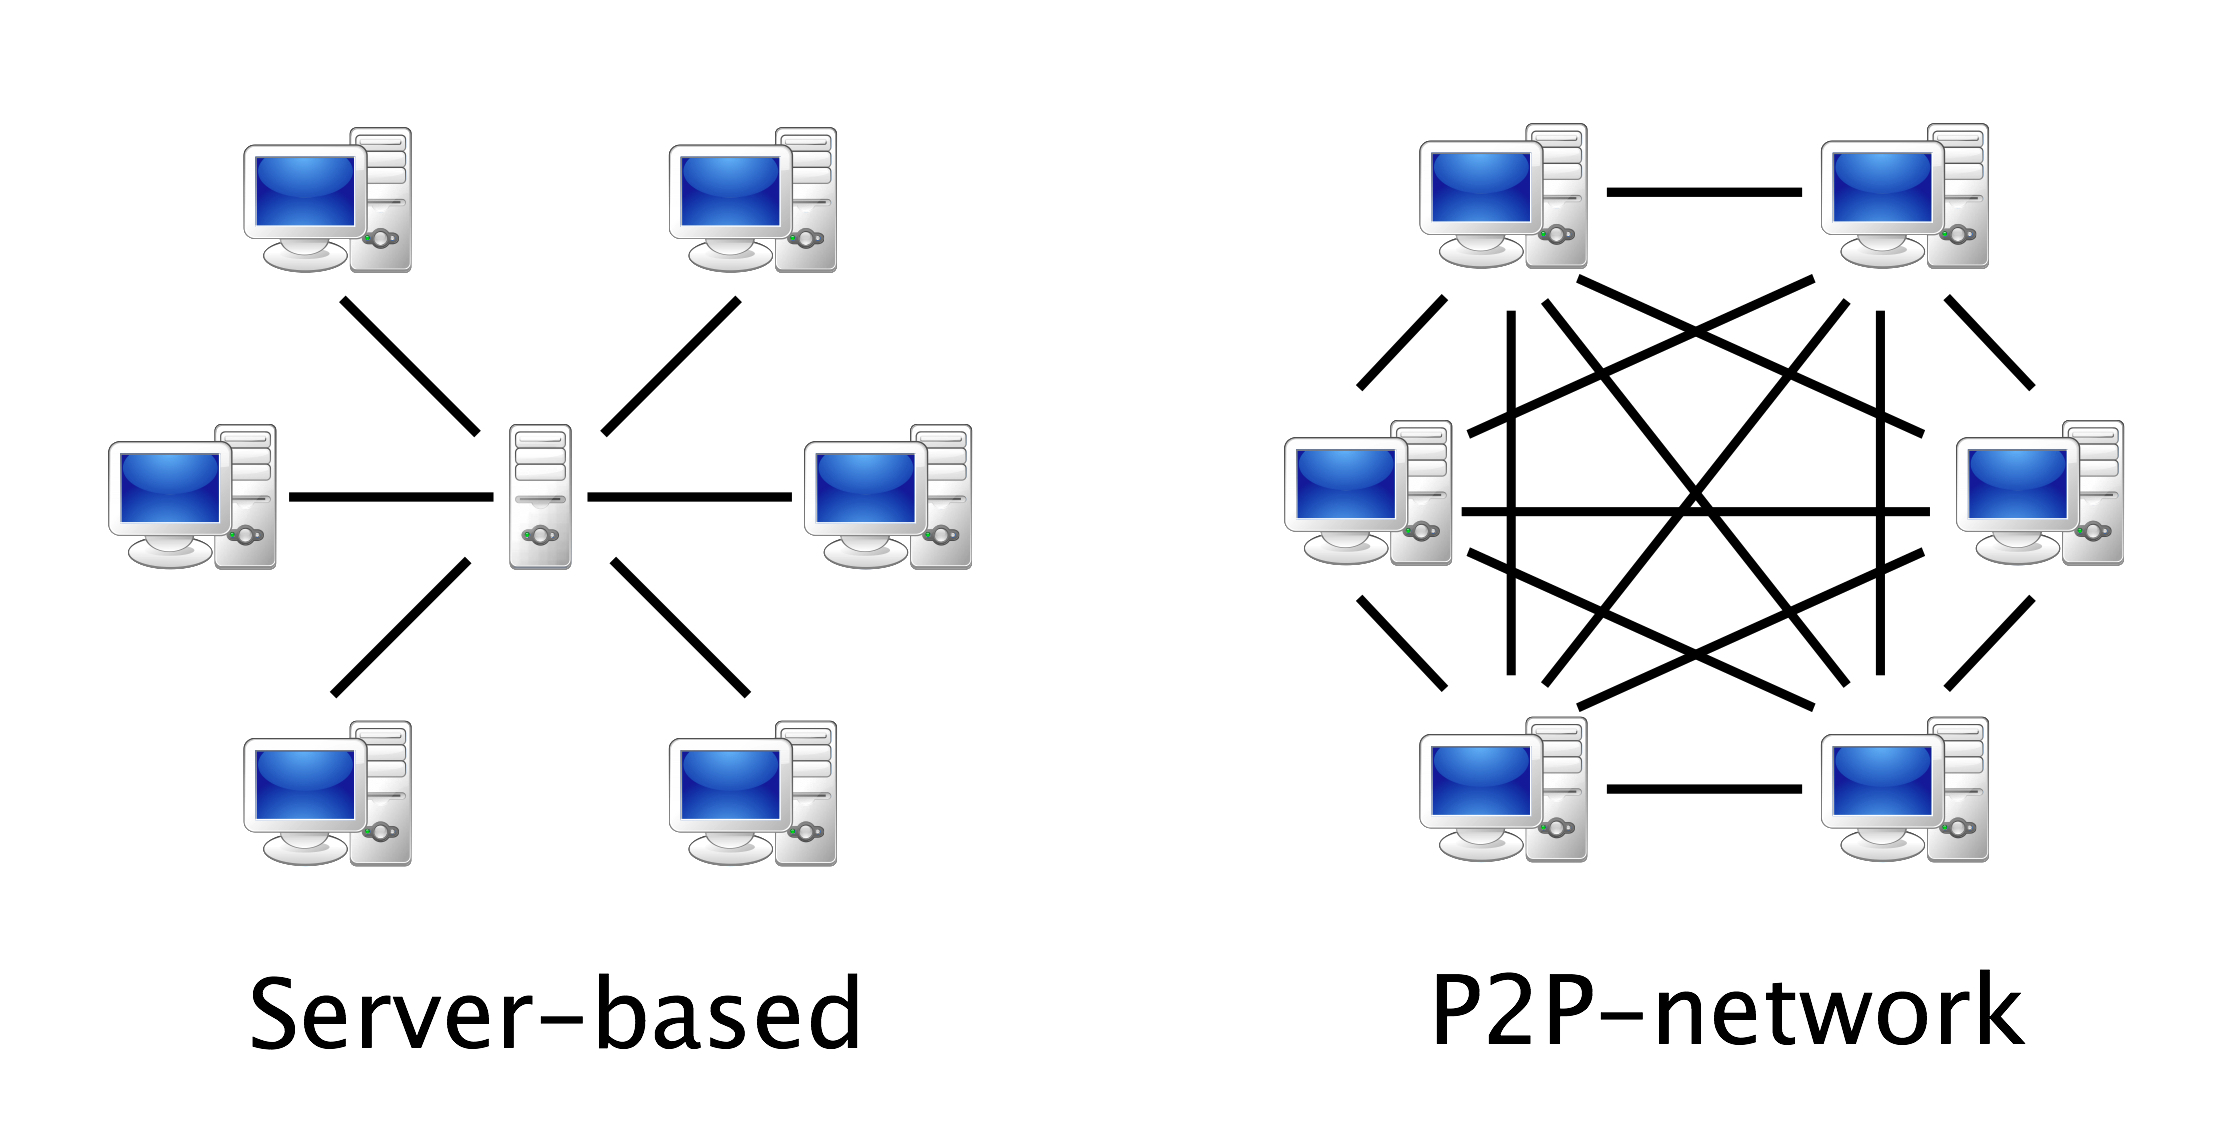 A client-server model (left) and a peer-to-peer system (right)